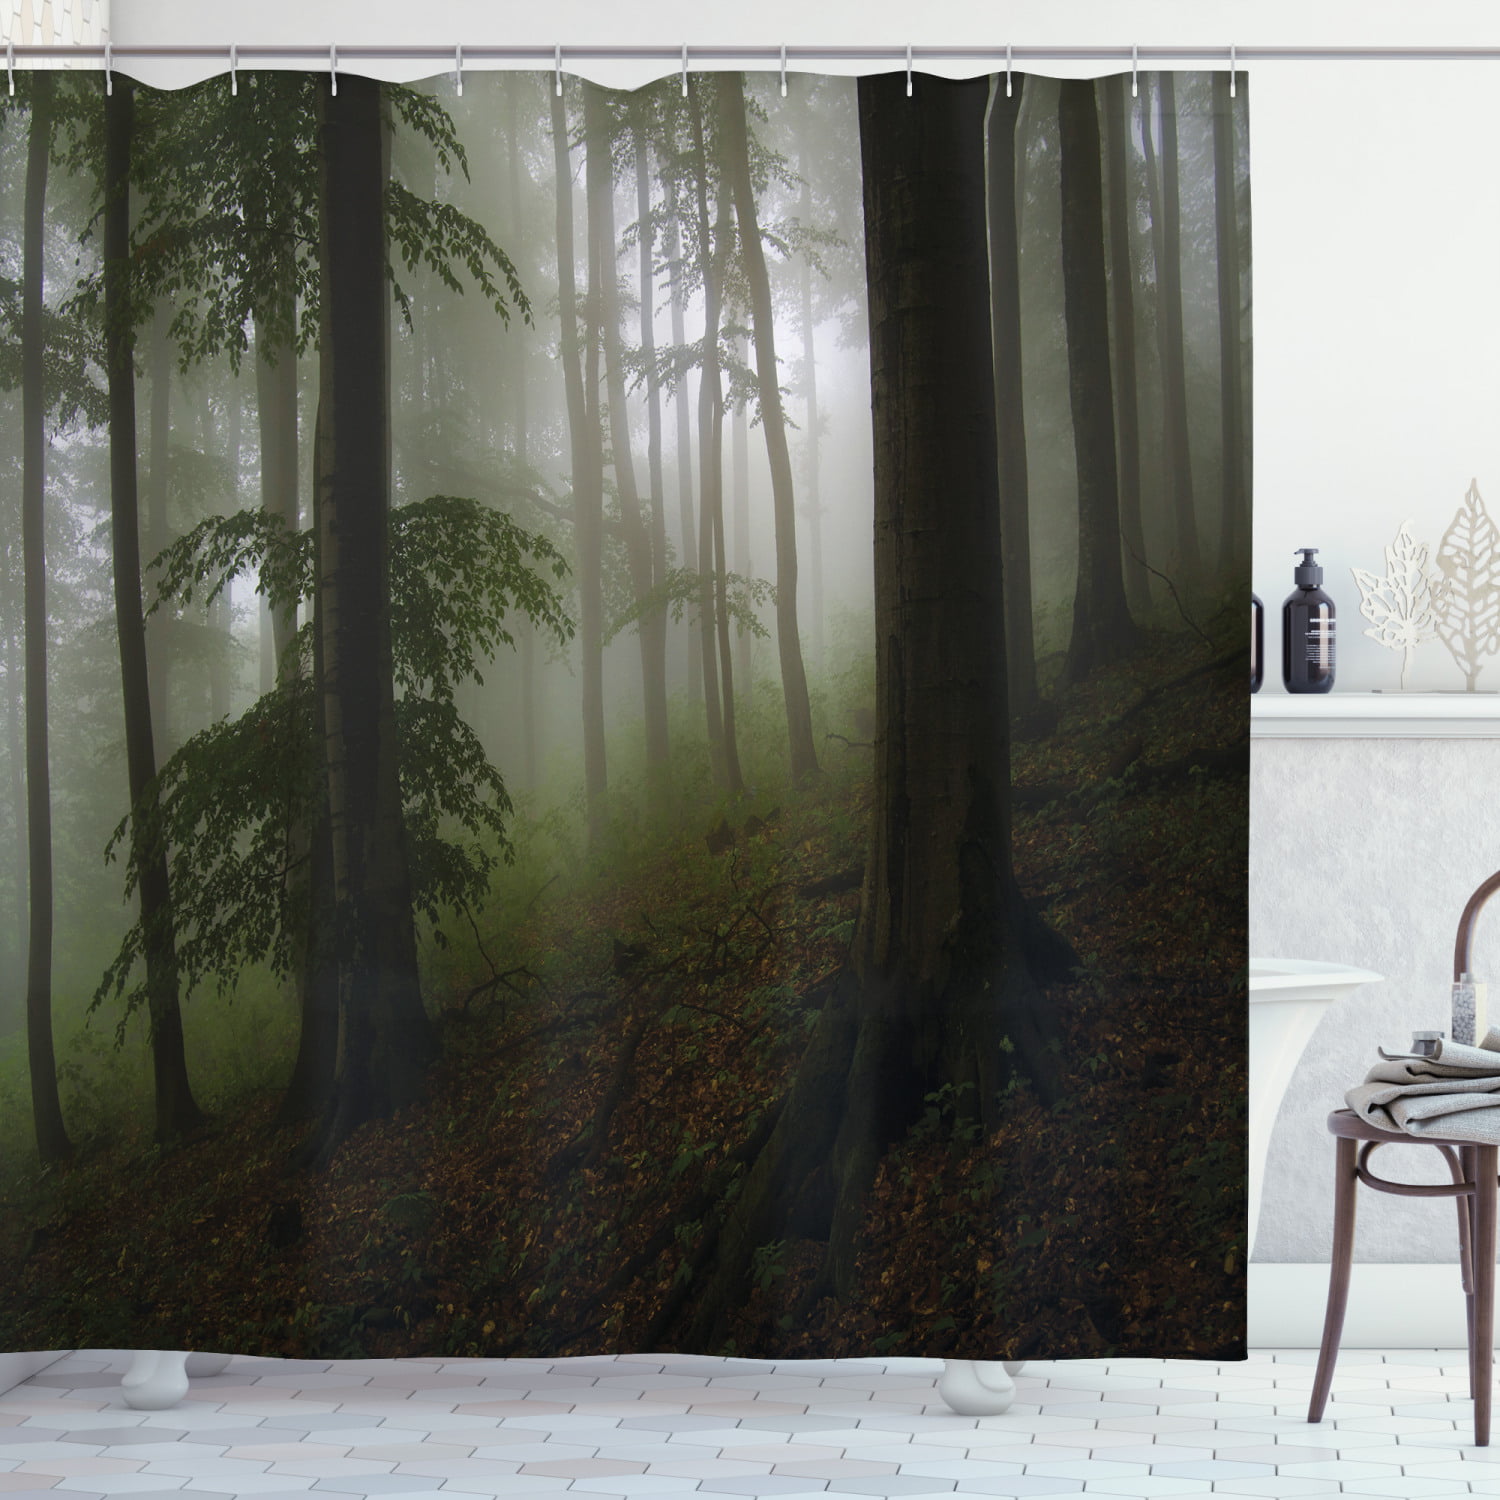 Details about   Masculine Woods Forest Rustic Fabric Shower Curtain Waterproof Mildew-Resistant 